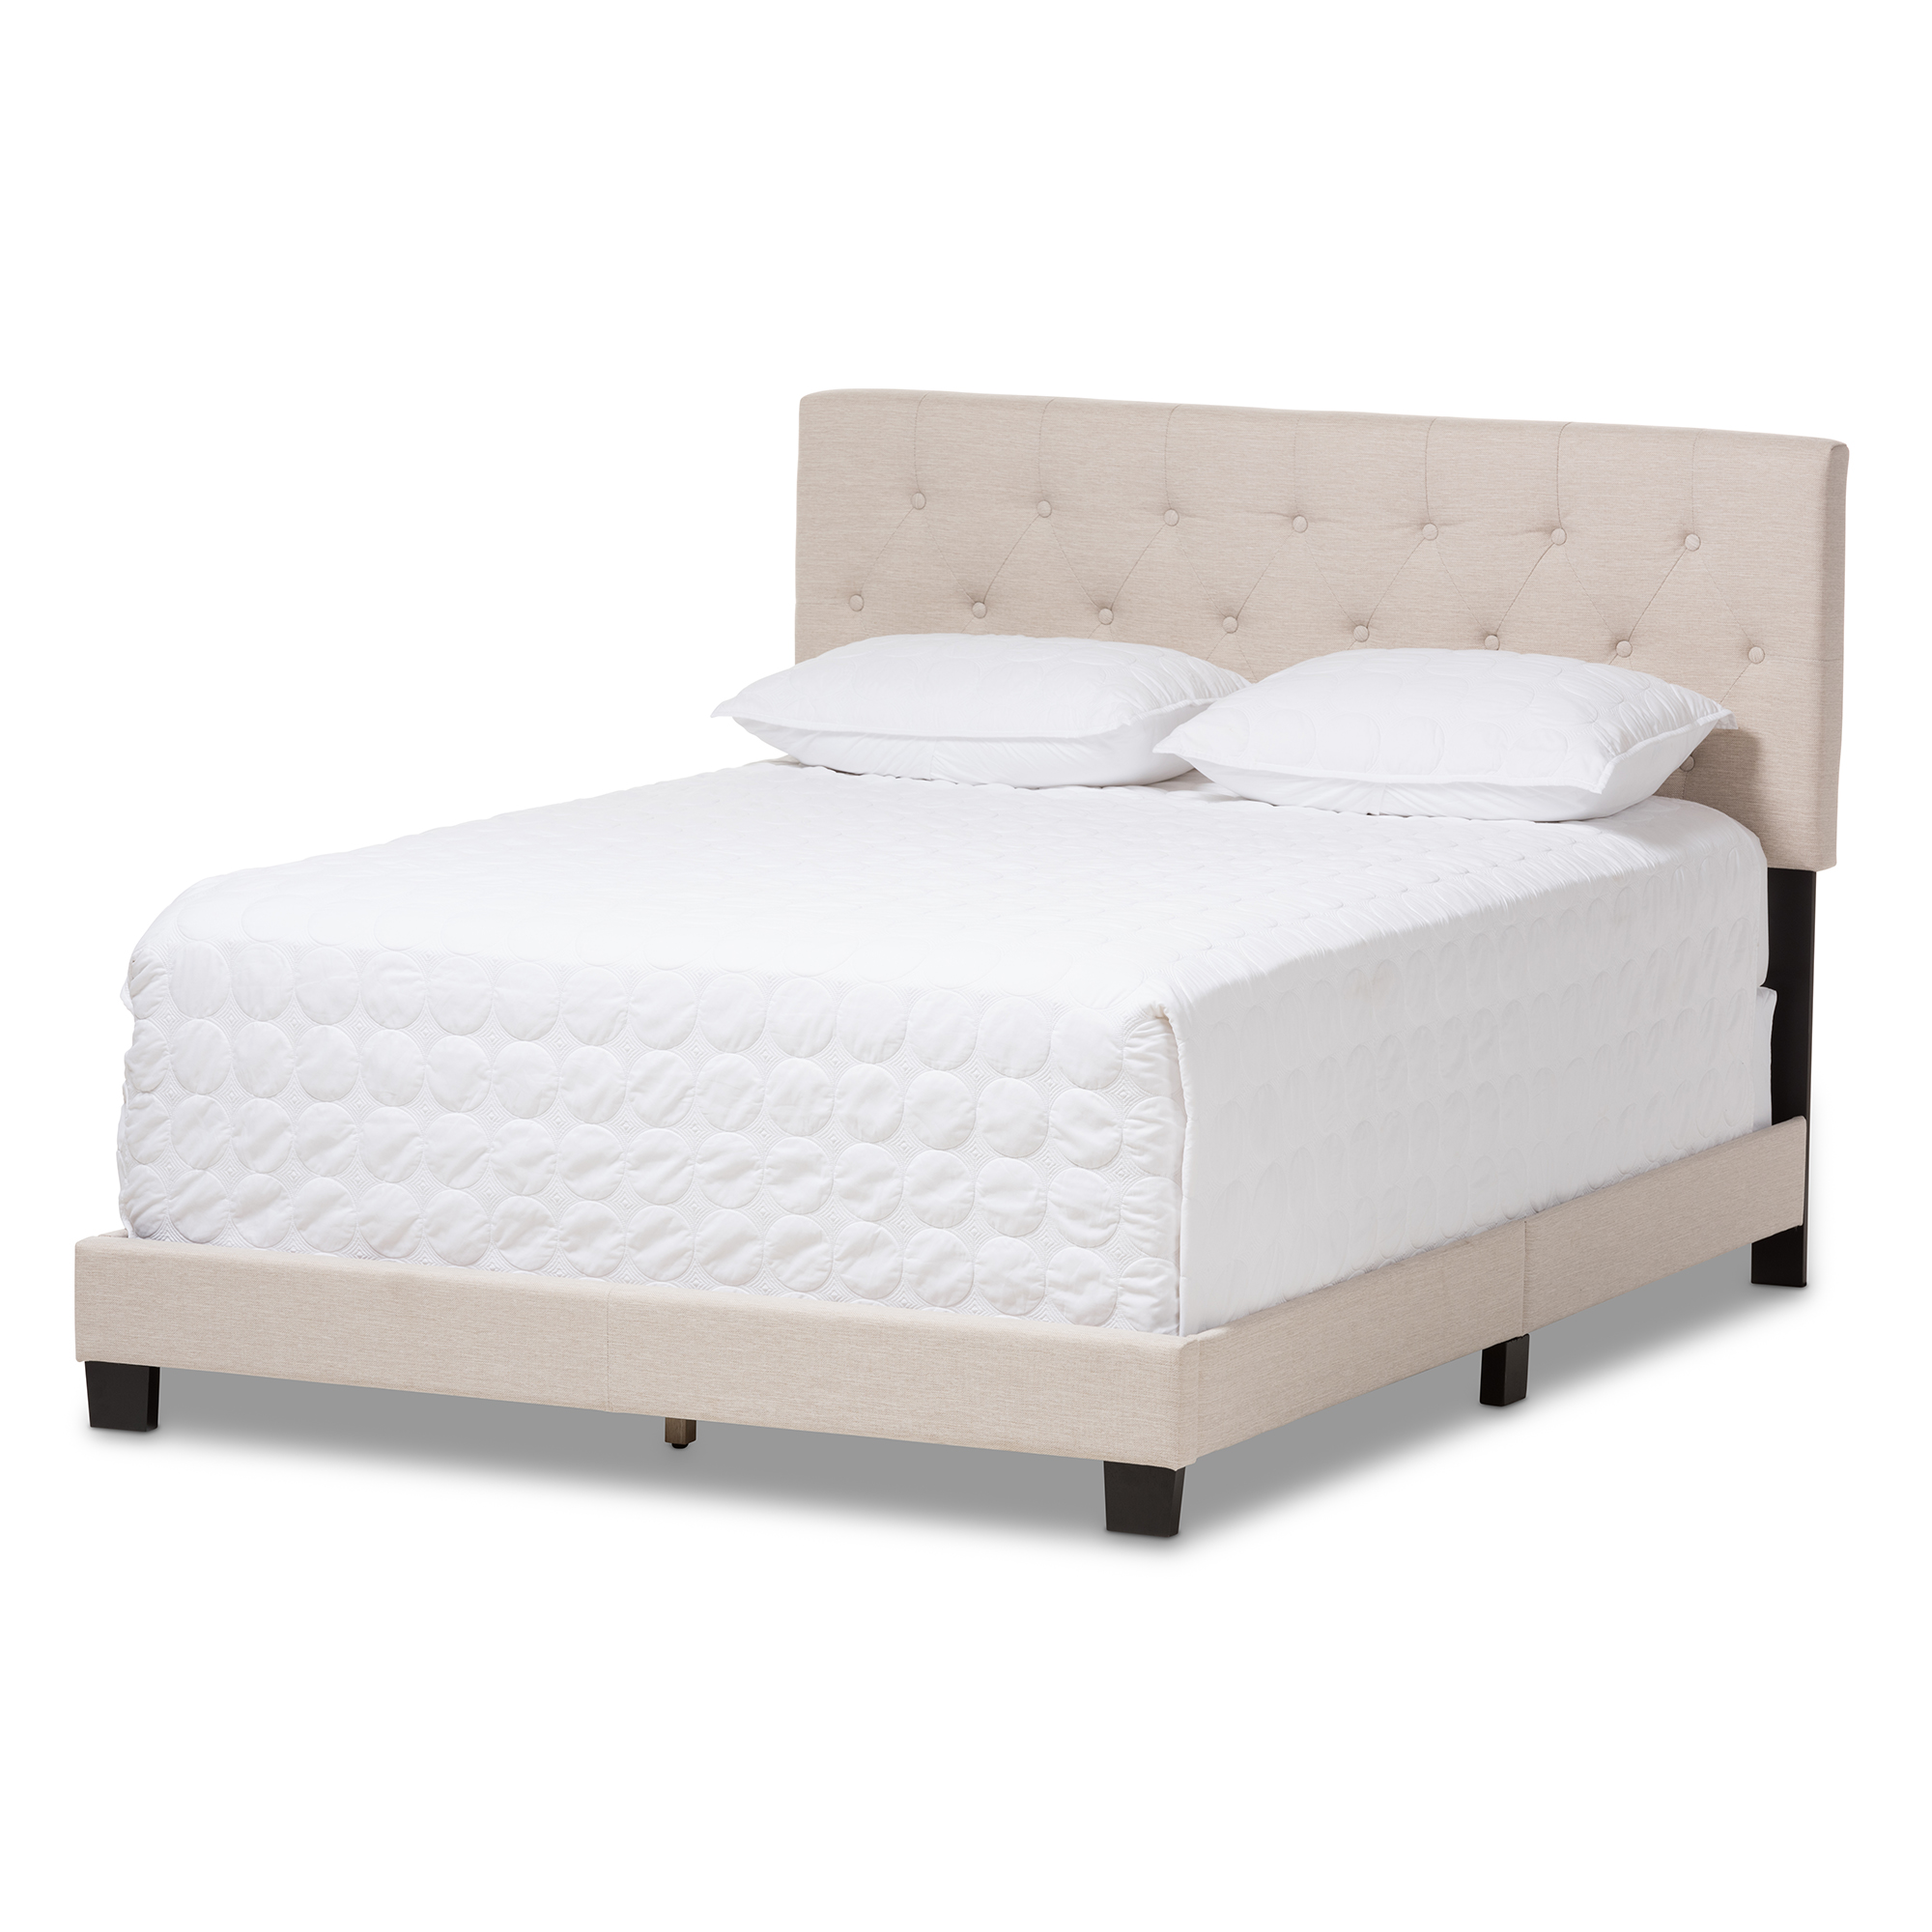 Baxton Studio Cassandra Modern and Contemporary Light Beige Fabric Upholstered Queen Size Bed